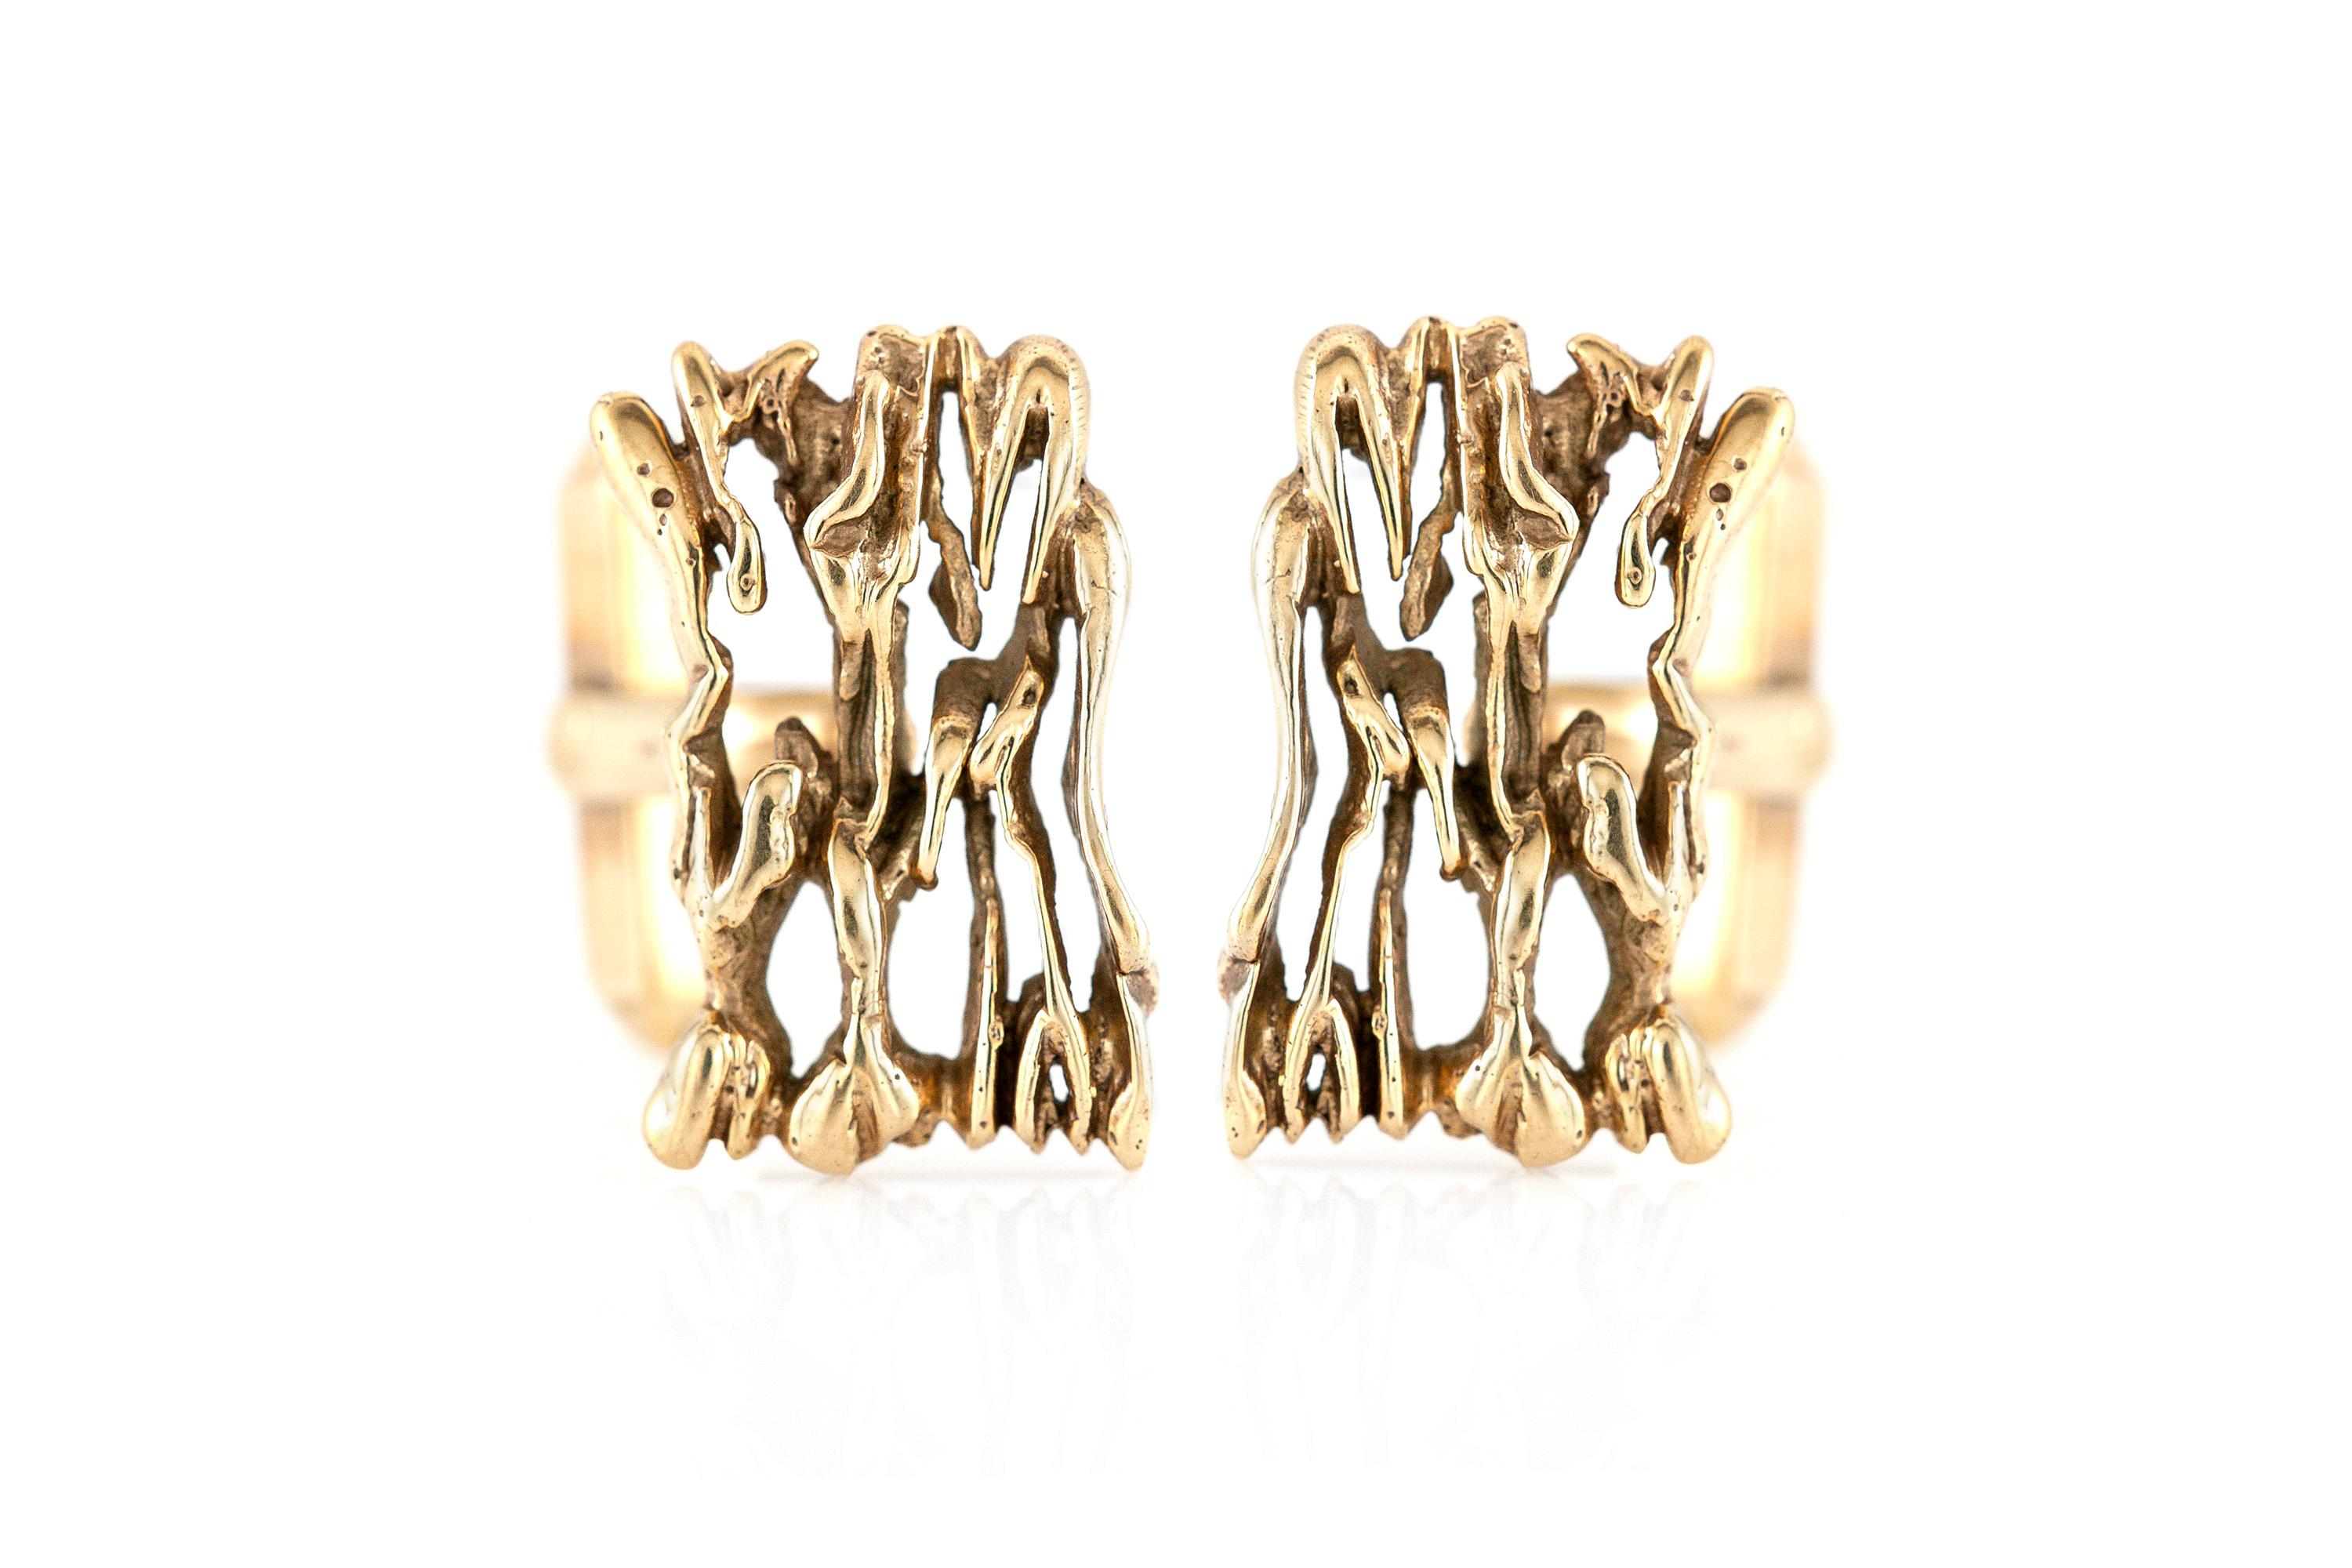 Cufflinks finely crafted in 9k gold, size of each cufflink is 1.10 inch. Circa 1920.